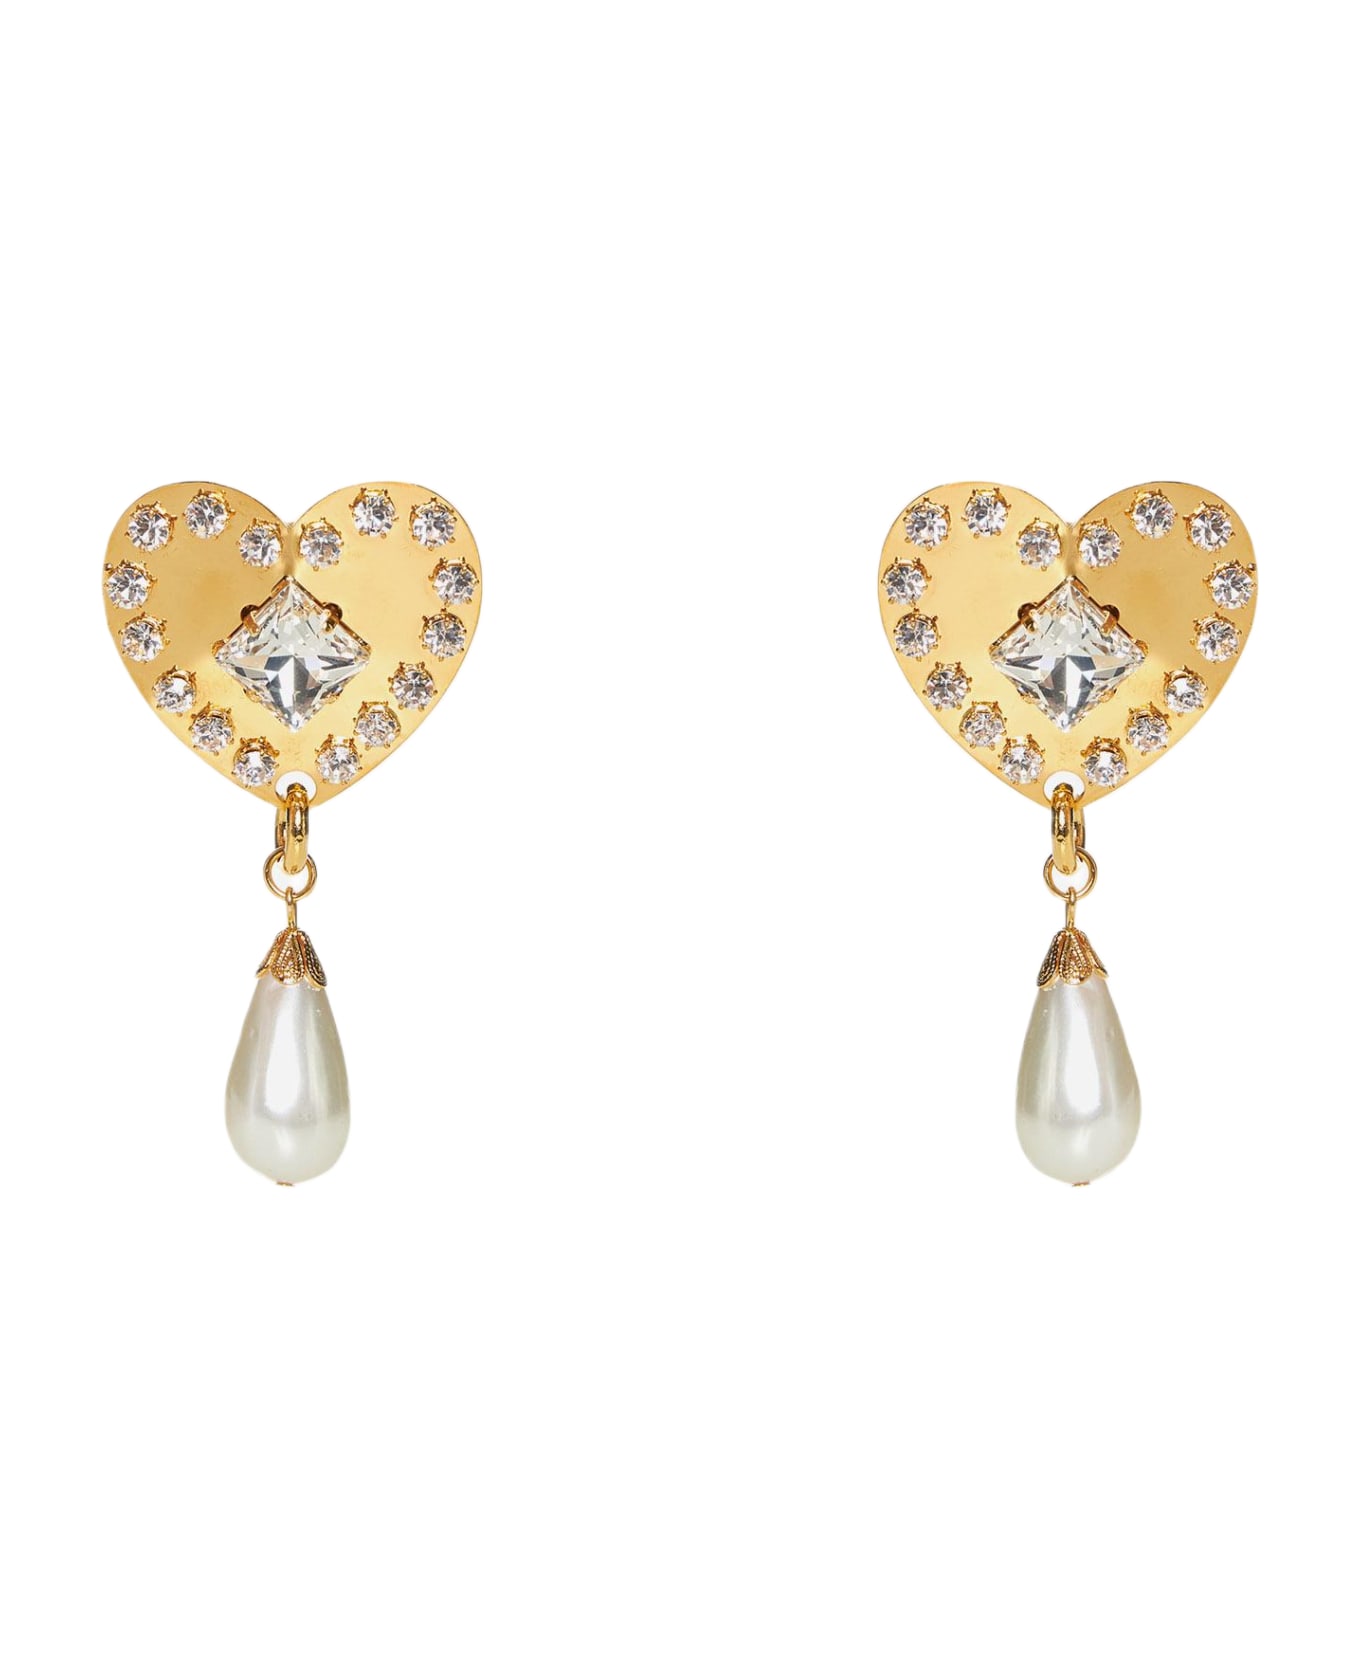 Alessandra Rich Heart Crystals And Pearl Earrings - GOLD/WHITE